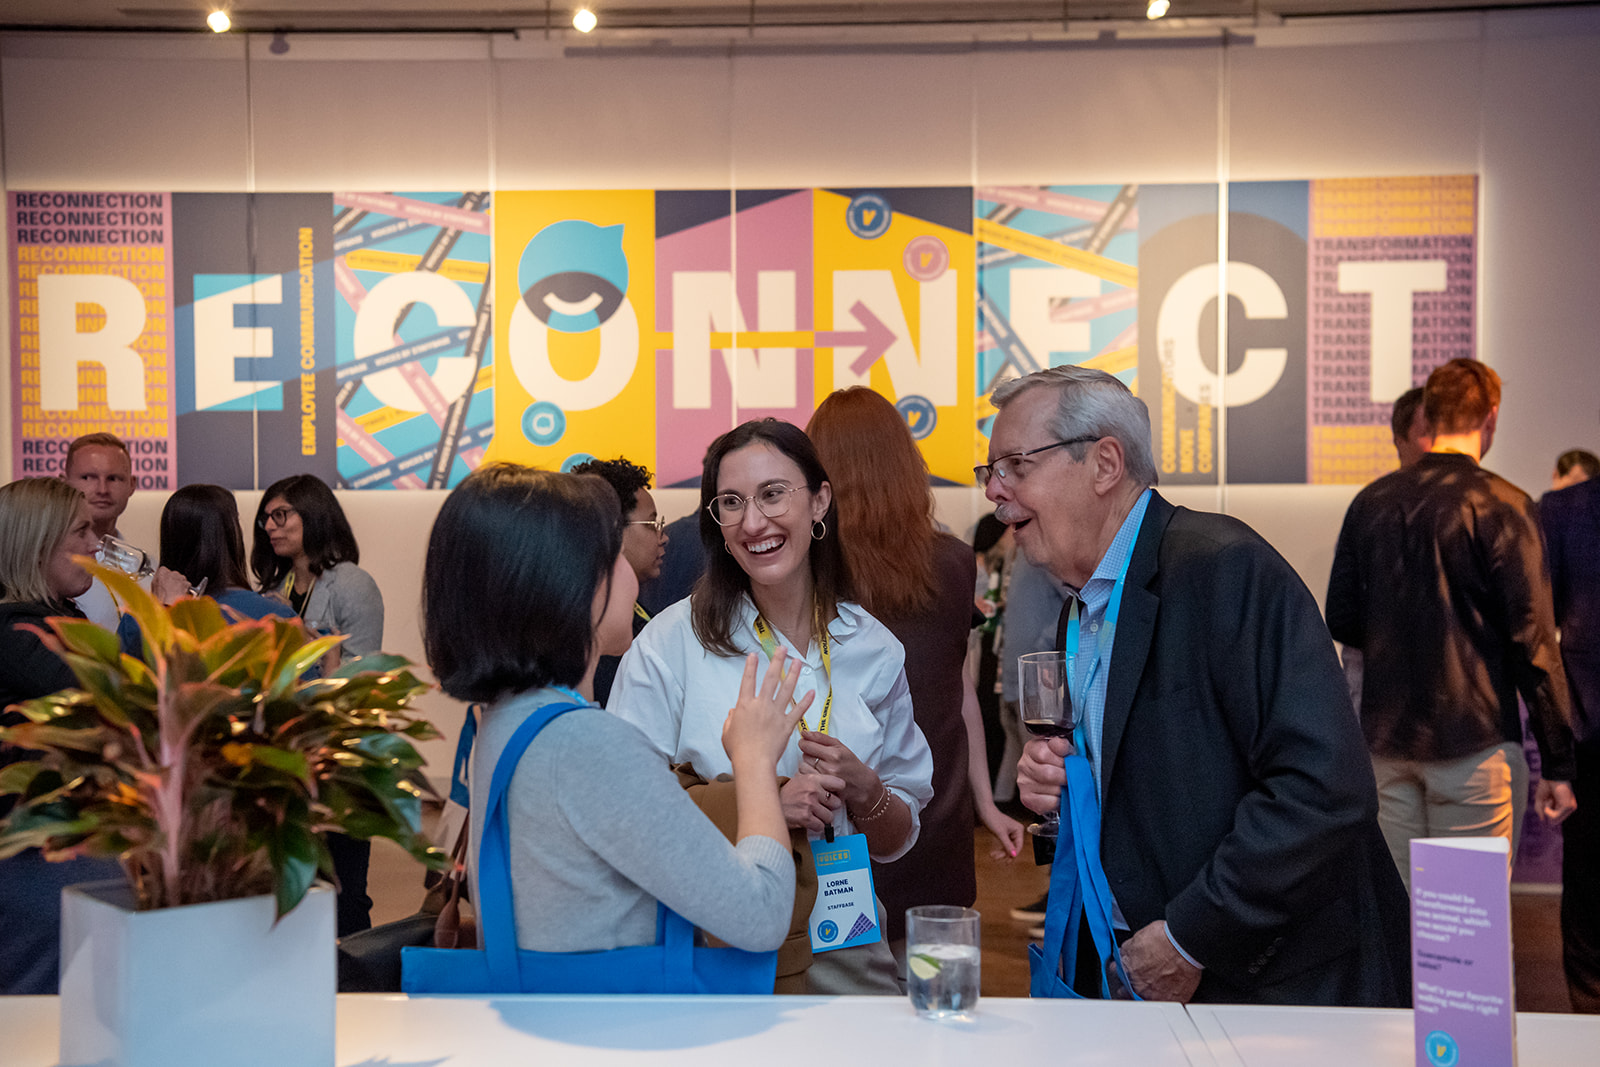 A group of internal communicators enjoy drinks and laughs at Staffbase's VOICES event in New York City. The background graphic behind them on the wall says "Reconnect".